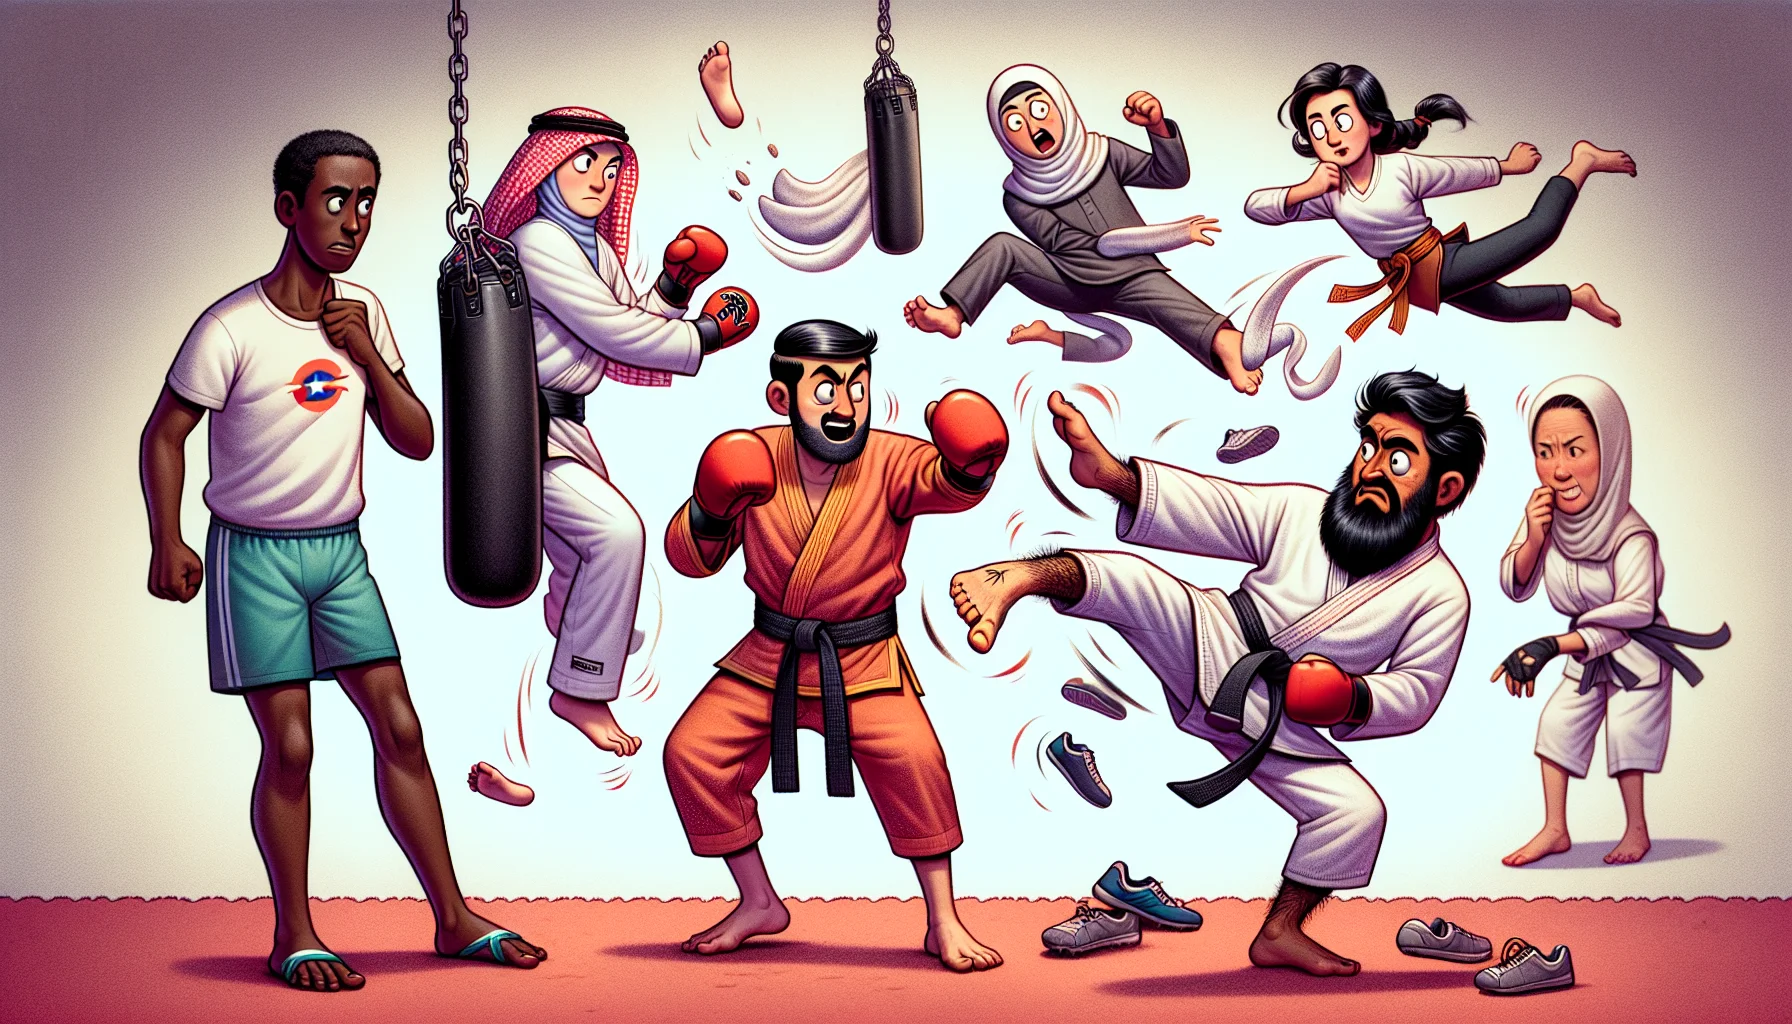 An amusing image showcasing various types of kickboxing techniques. On the left, a Middle-Eastern female kickboxer is attempting a roundhouse kick, but her shoe is surprisingly flying off, landing on a kickboxing pad held by an amused Hispanic male trainer. In the middle, a Black male kickboxer is performing a spinning back kick, but his towel is humorously wrapping around him like a cape. On the right, a Caucasian female kickboxer is executing a high kick, but her hair tie is comically springing off, startling a South Asian male holdmate. This scene highlights the unexpected humorous situations that occur during an intense kickboxing session, encouraging viewers to embrace the fun side of physical exercises.